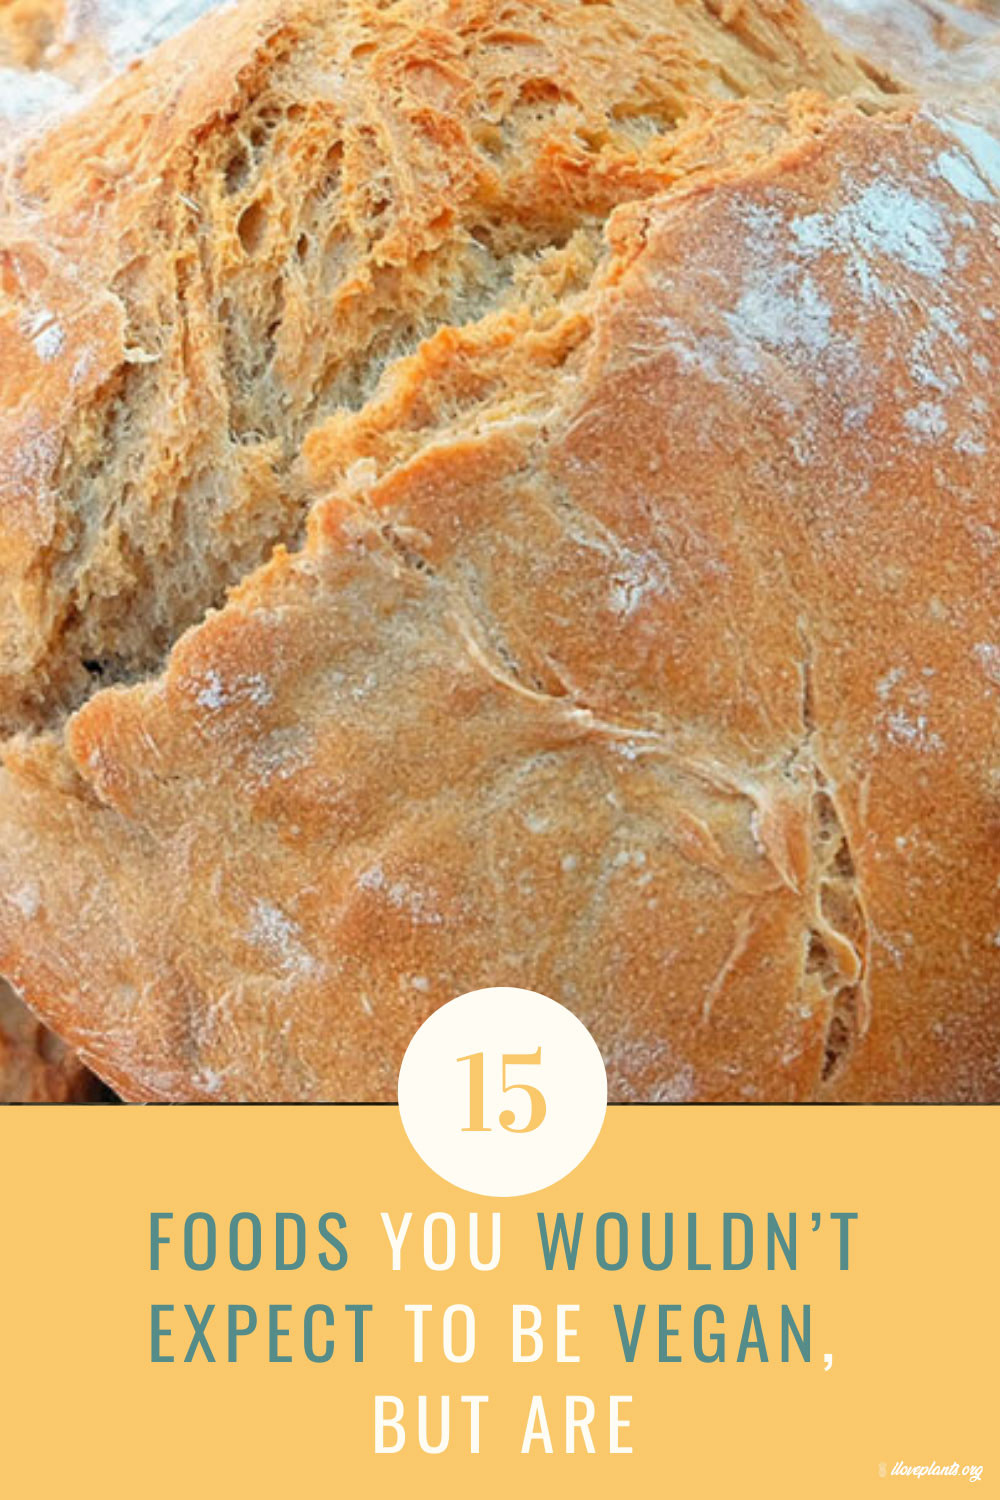 15-Foods-You-Wouldnt-Expect-To-Be-Vegan-But-Are-pin-8 - i love plants